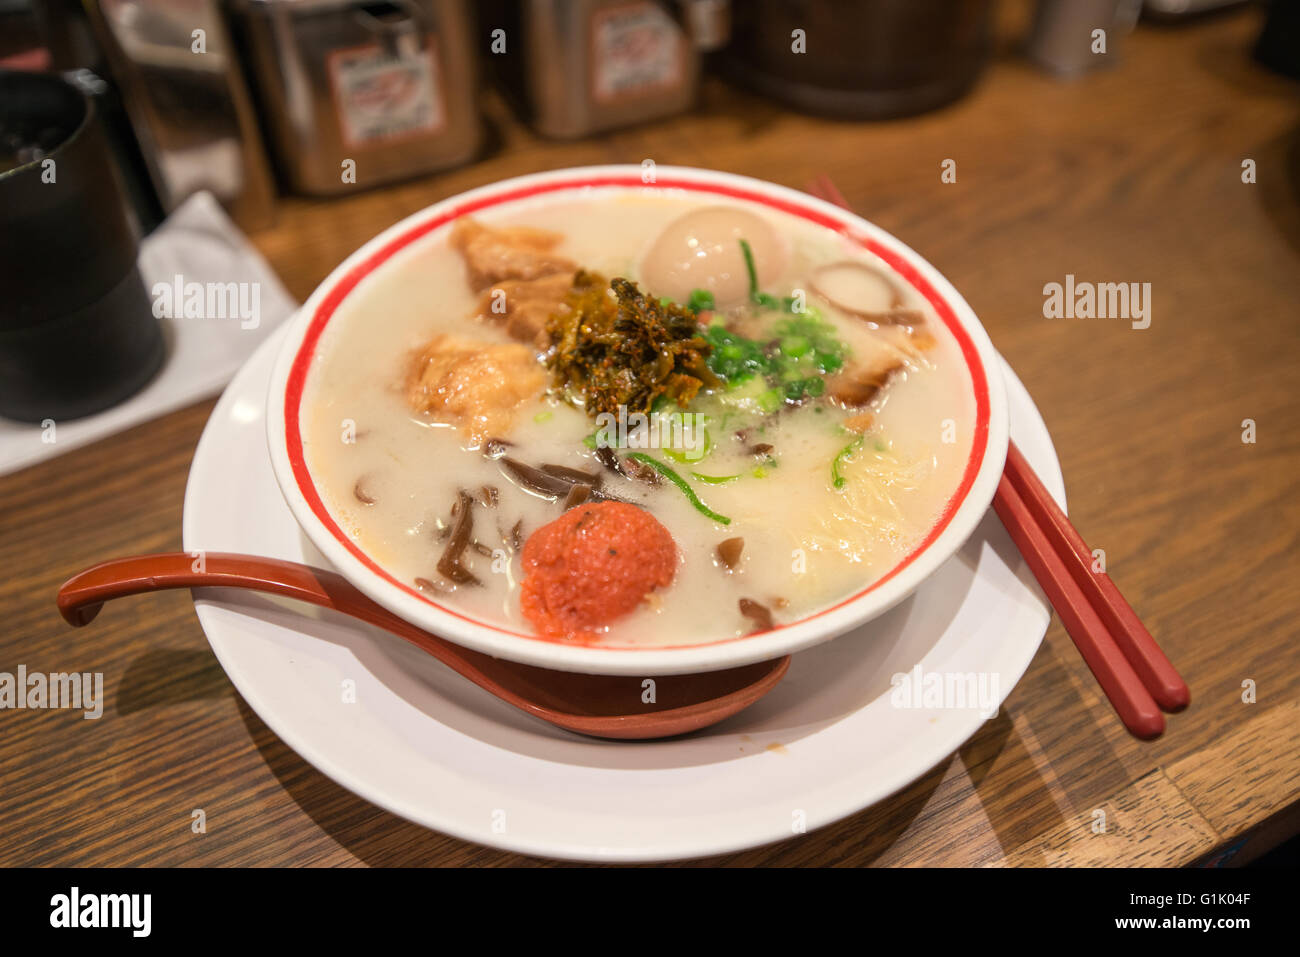 A bowl of Japanese styled soup on table Stock Photo